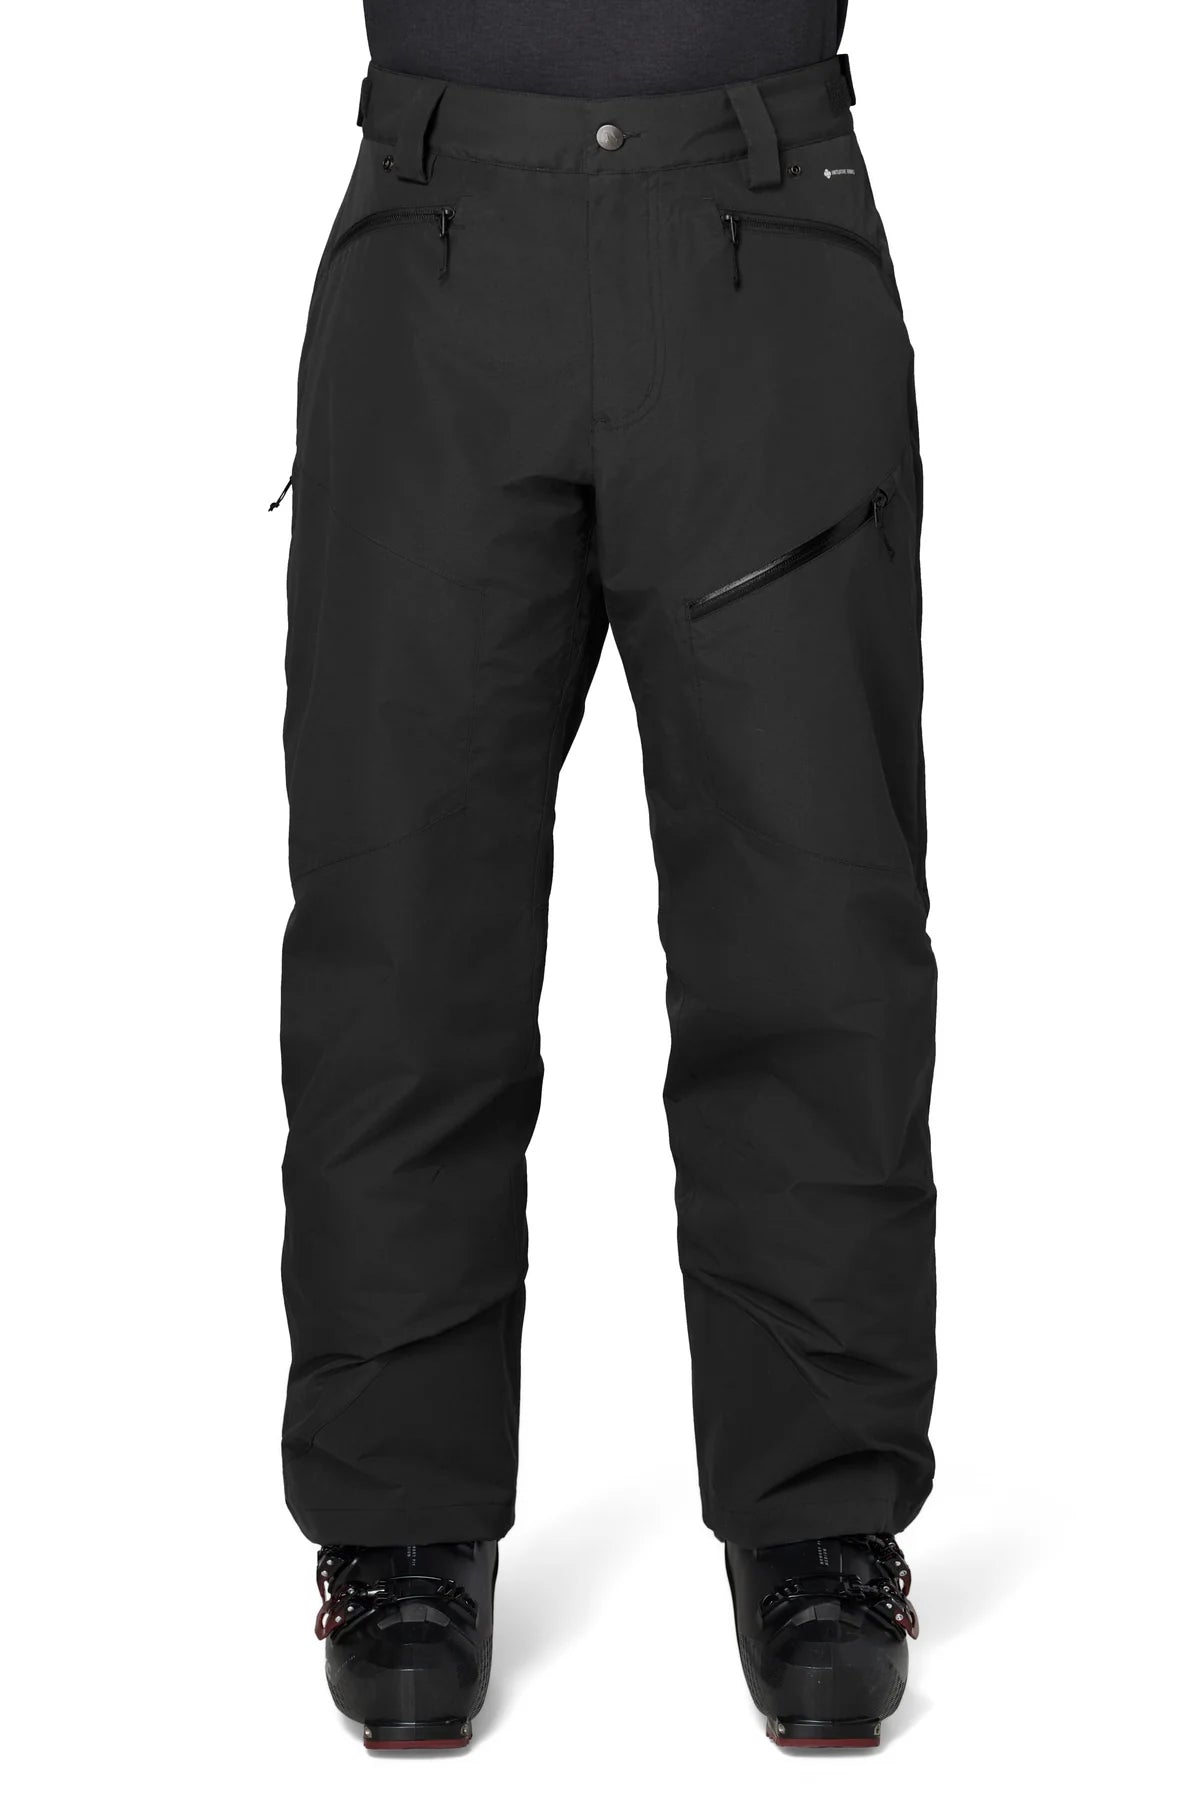 Outdoor Research Snowcrew Insulated Pants Men's - Trailhead Paddle